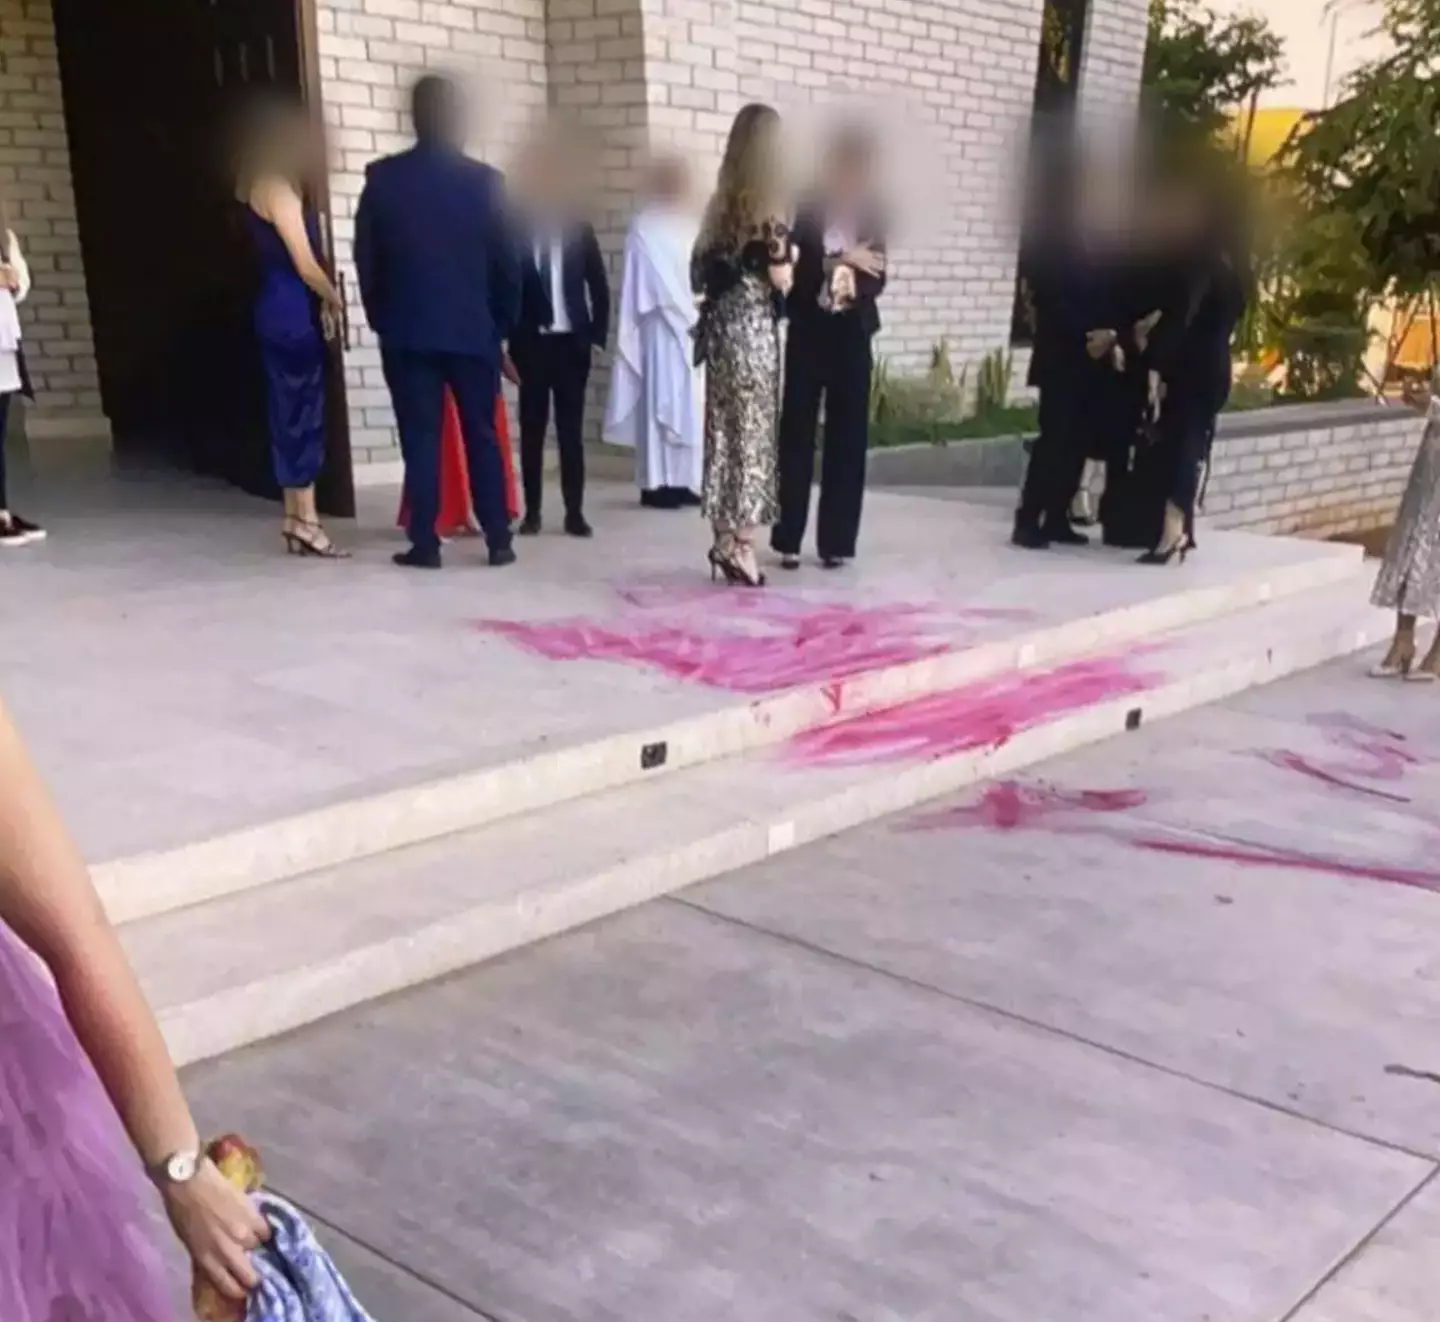 There was red paint all over the church steps.